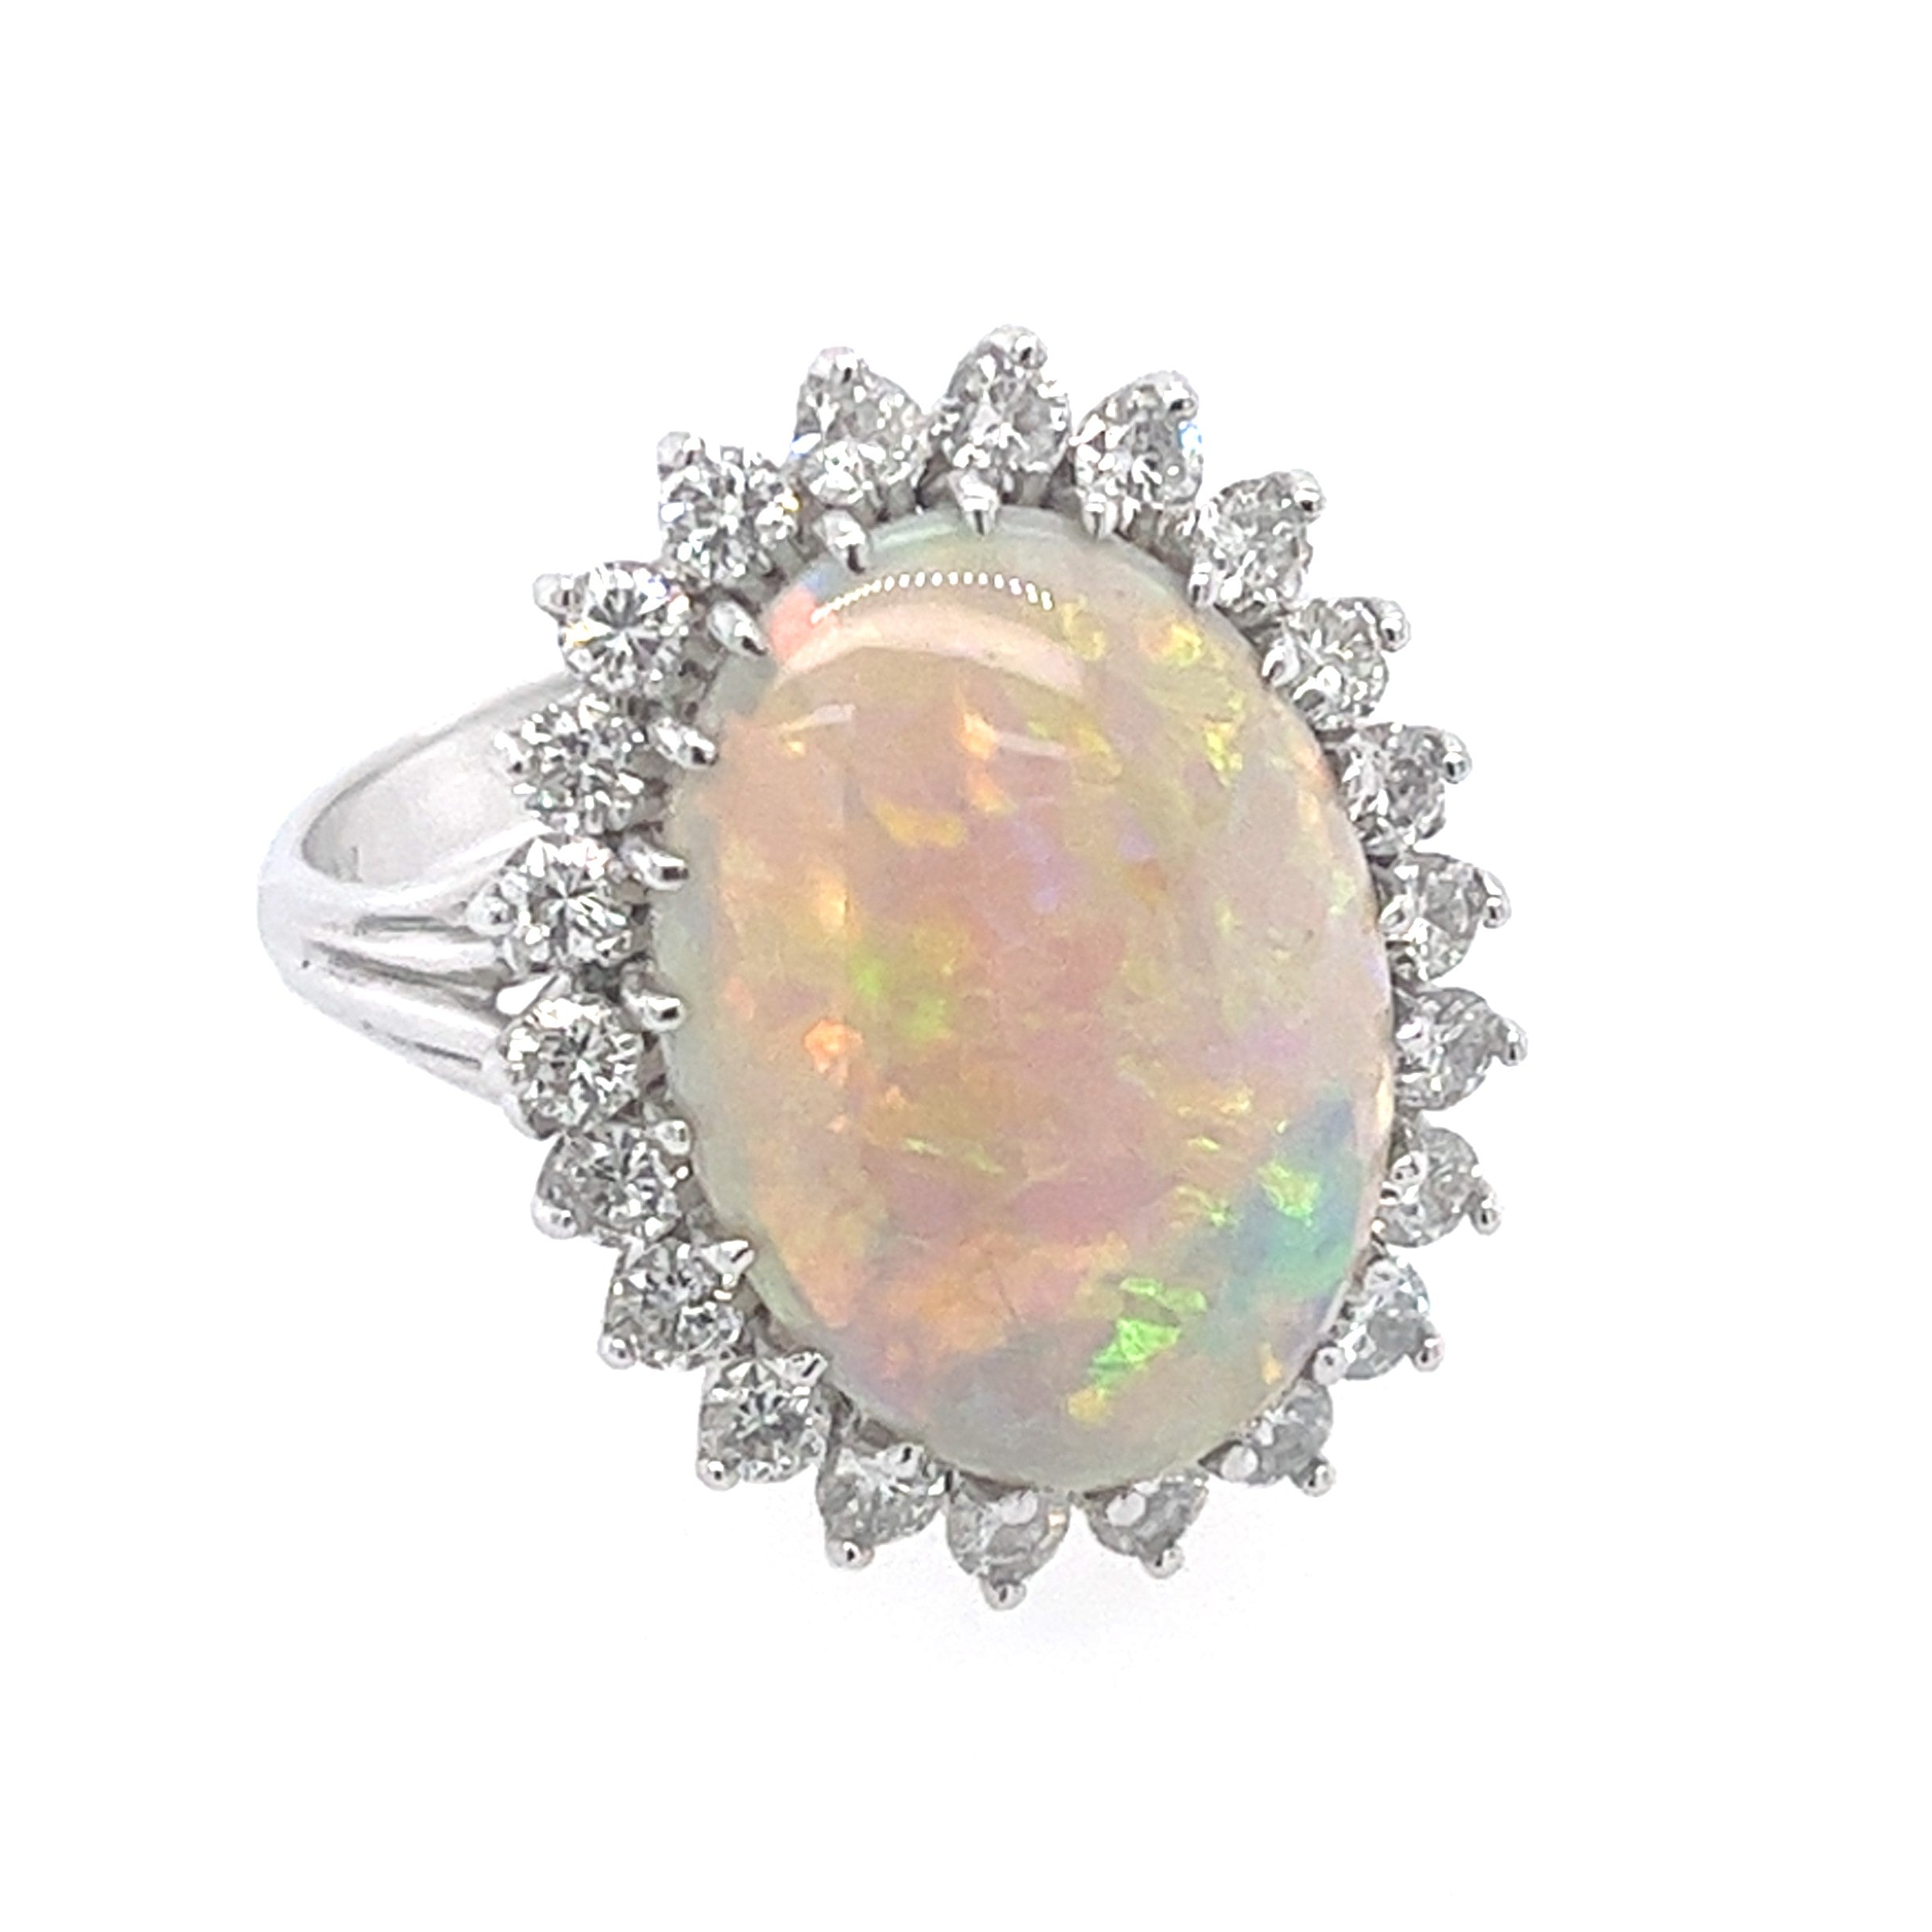 14KT WHITE GOLD OPAL AND DIAMONDS LADIES RING